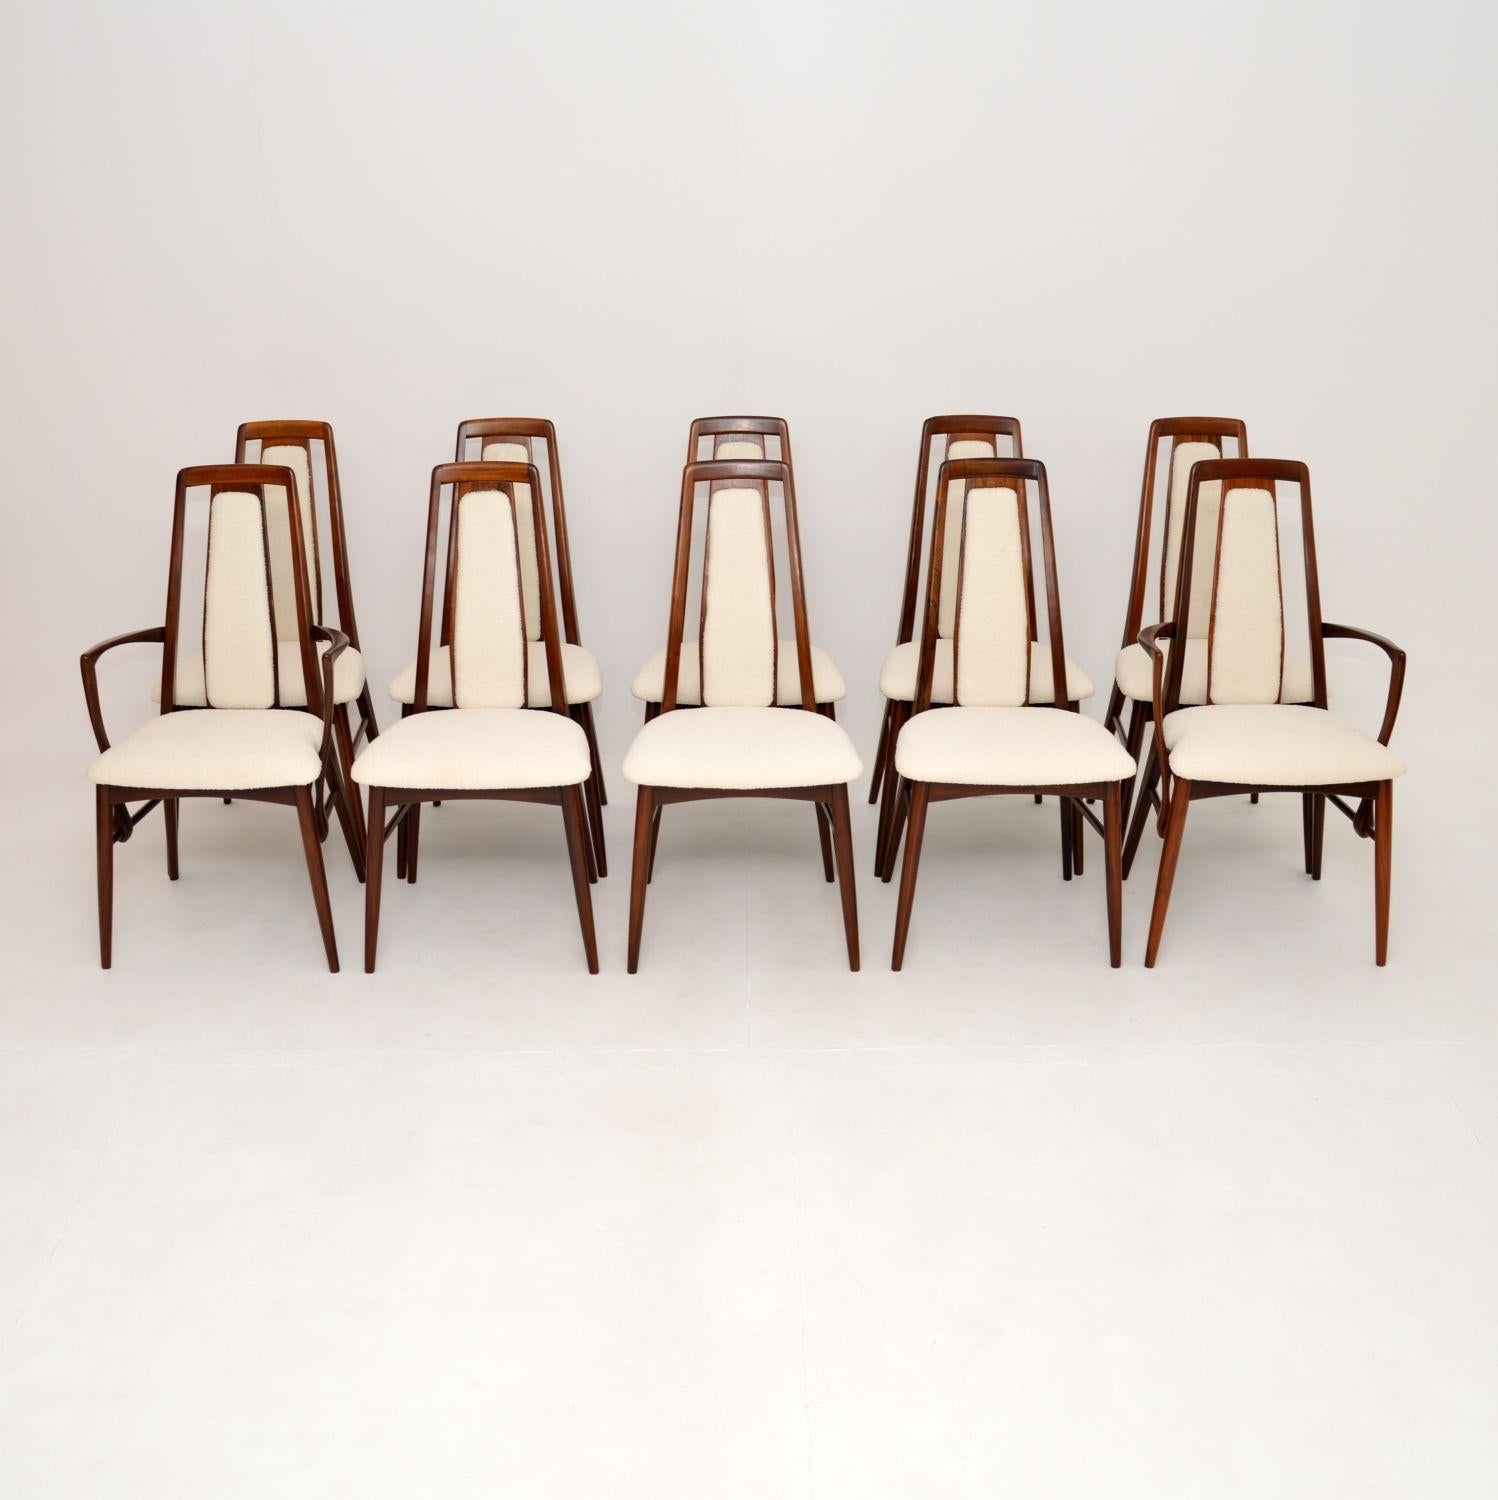 A stunning set of ten Danish vintage dining chairs. They were designed by Niels Koefoed and manufactured by Koefoed Hornslet in the 1960’s.

They have a beautiful design, the quality is superb and they are very comfortable. The grain patterns are